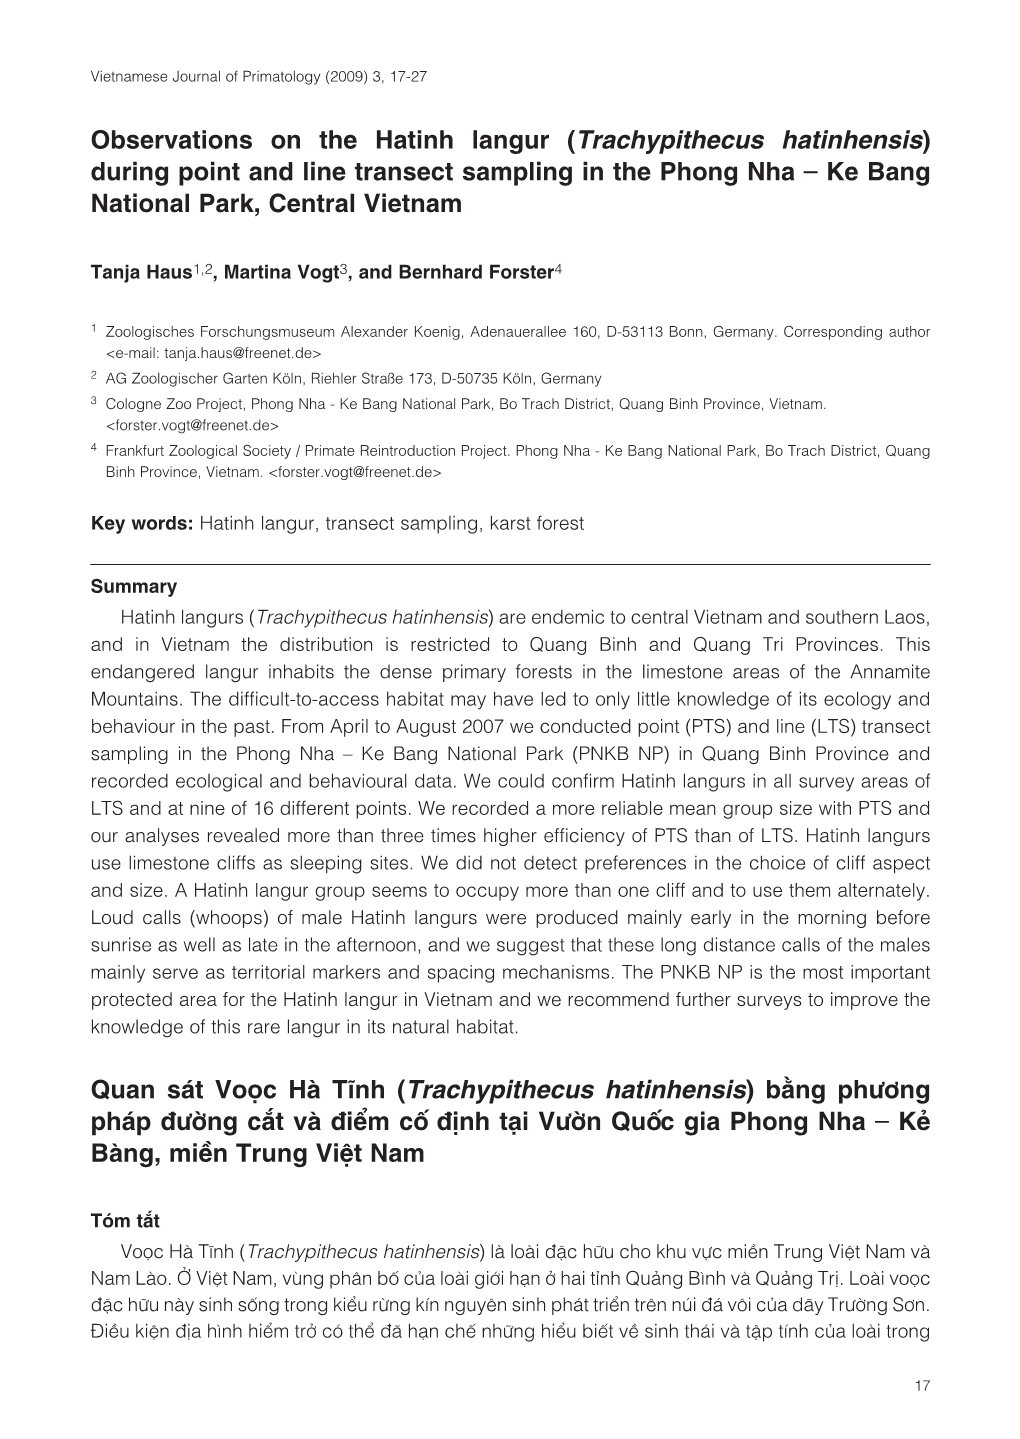 Observations on the Hatinh Langur (Trachypithecus Hatinhensis) During Point and Line Transect Sampling in the Phong Nha – Ke Bang National Park, Central Vietnam